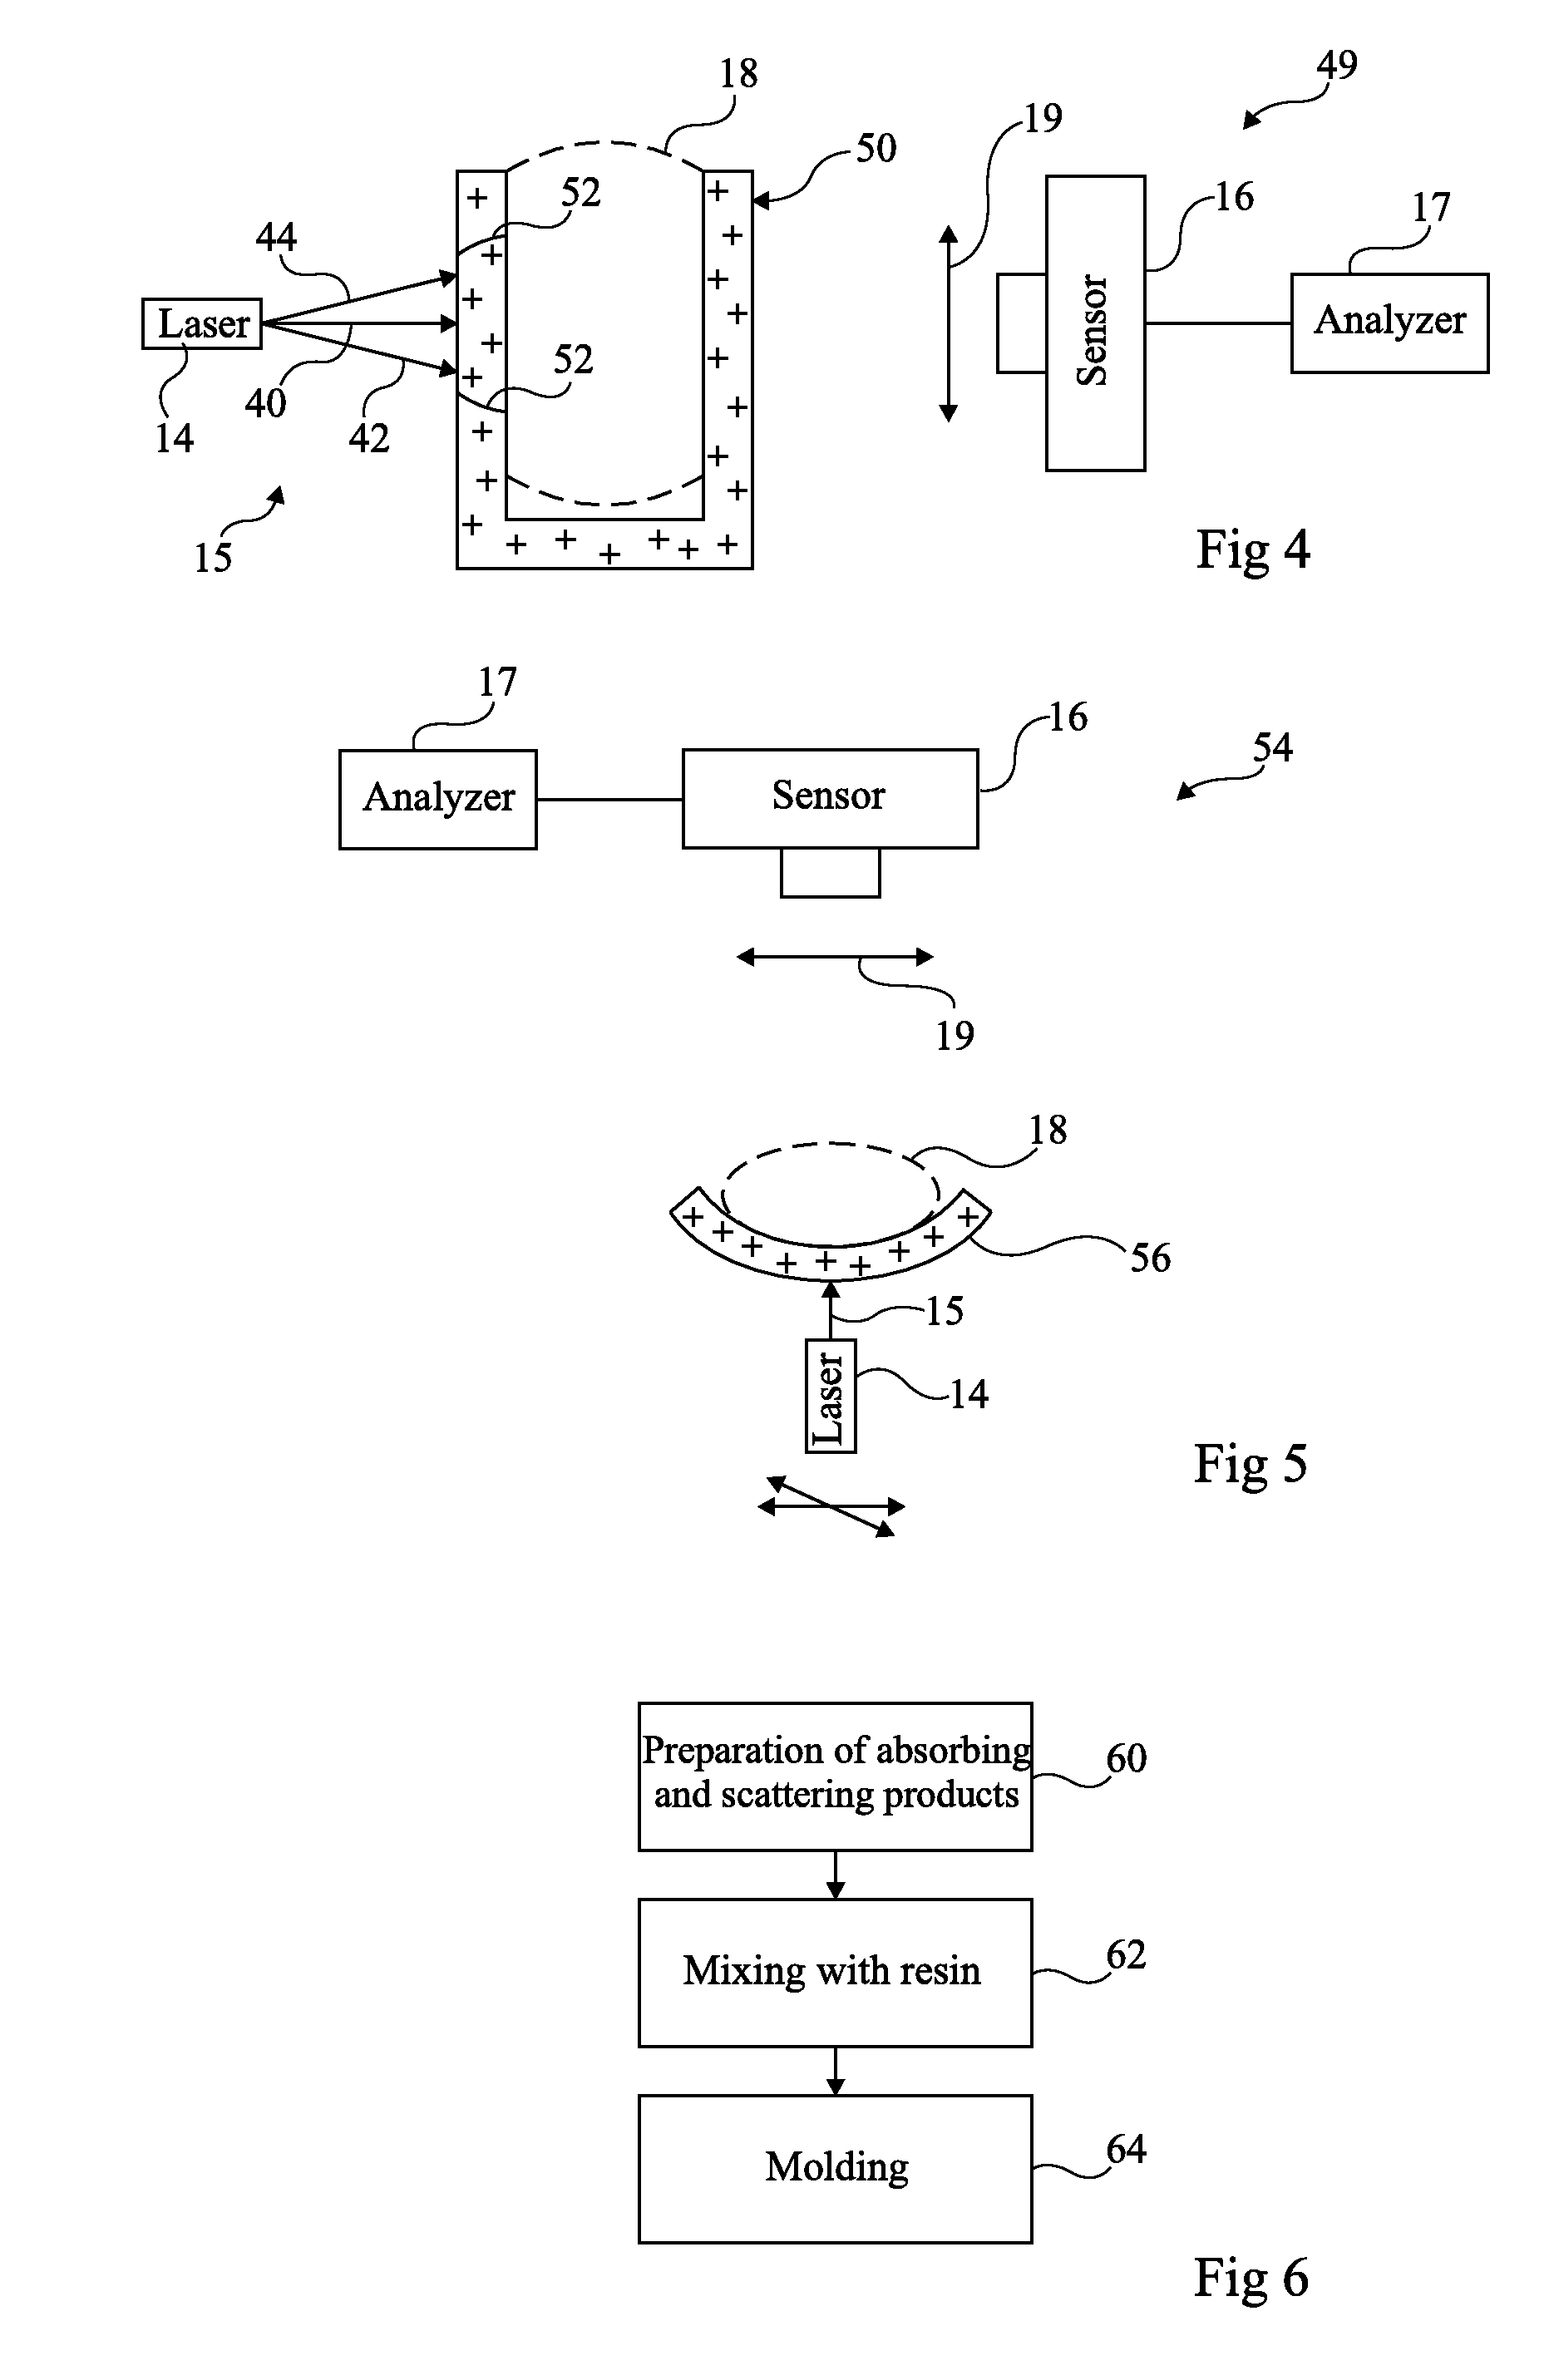 Optical device for analyzing a scattering medium held by a support